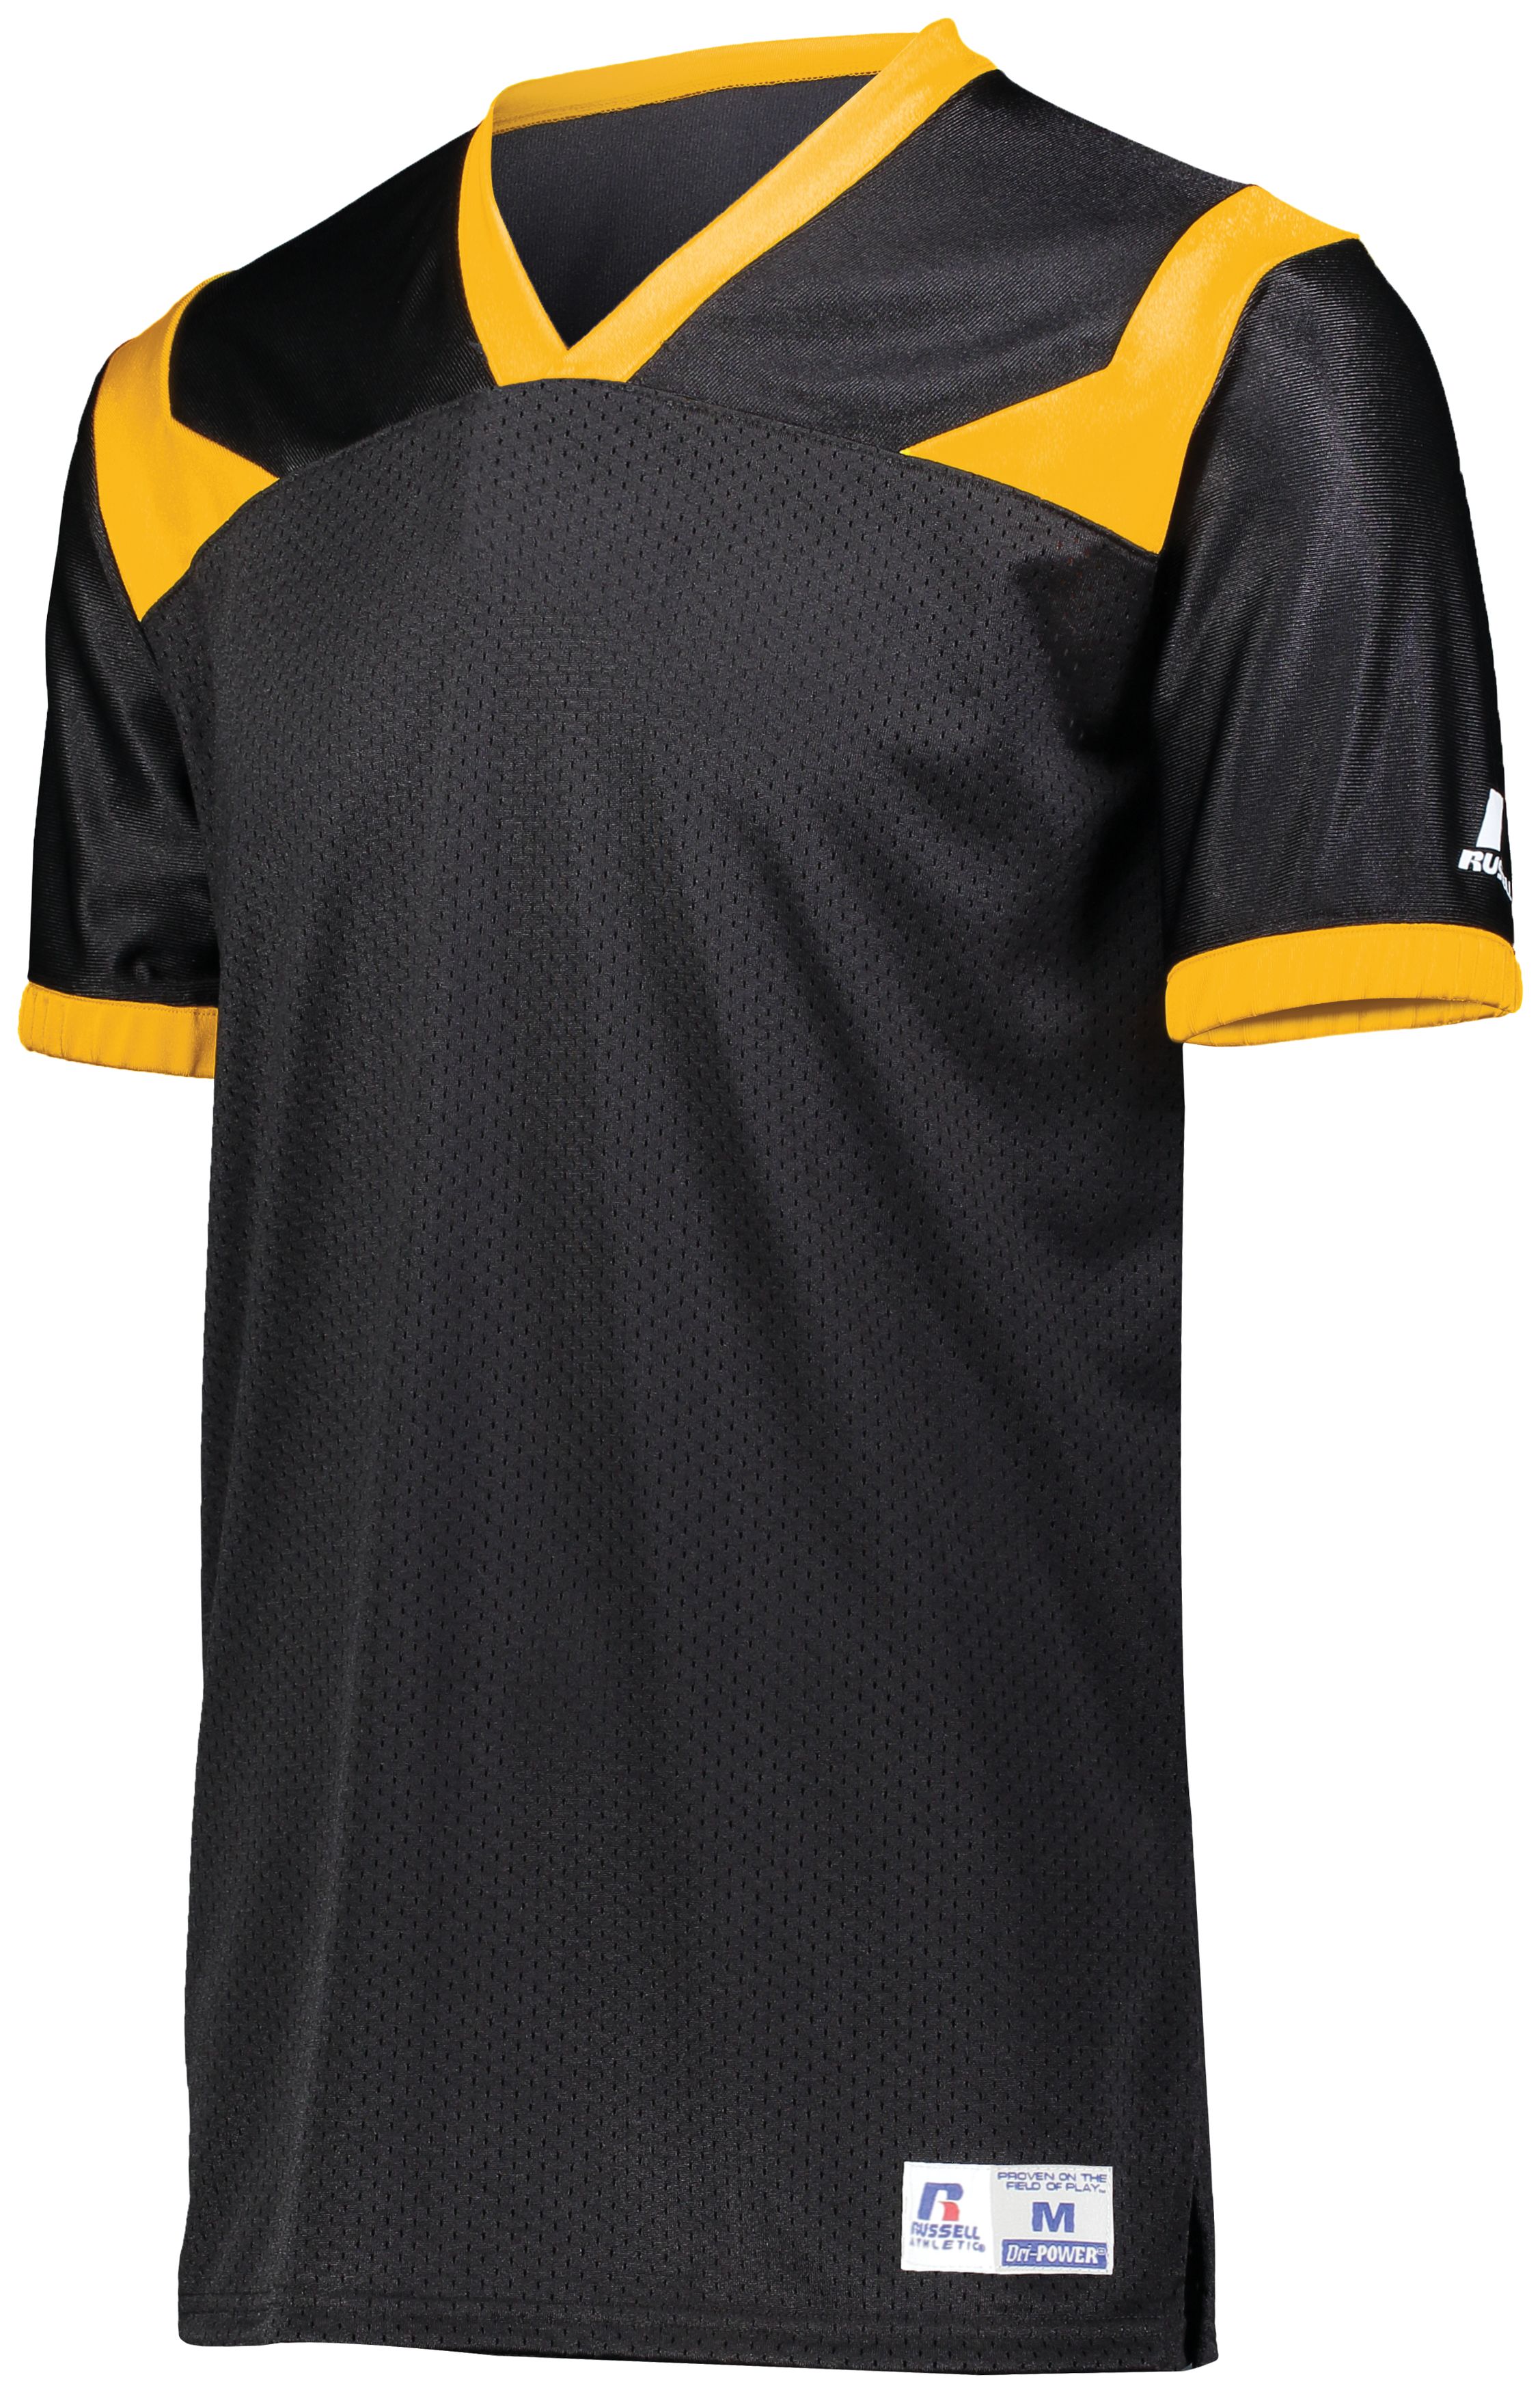 Russell Athletic R0493B - Youth Phenom6 Flag Football Jersey